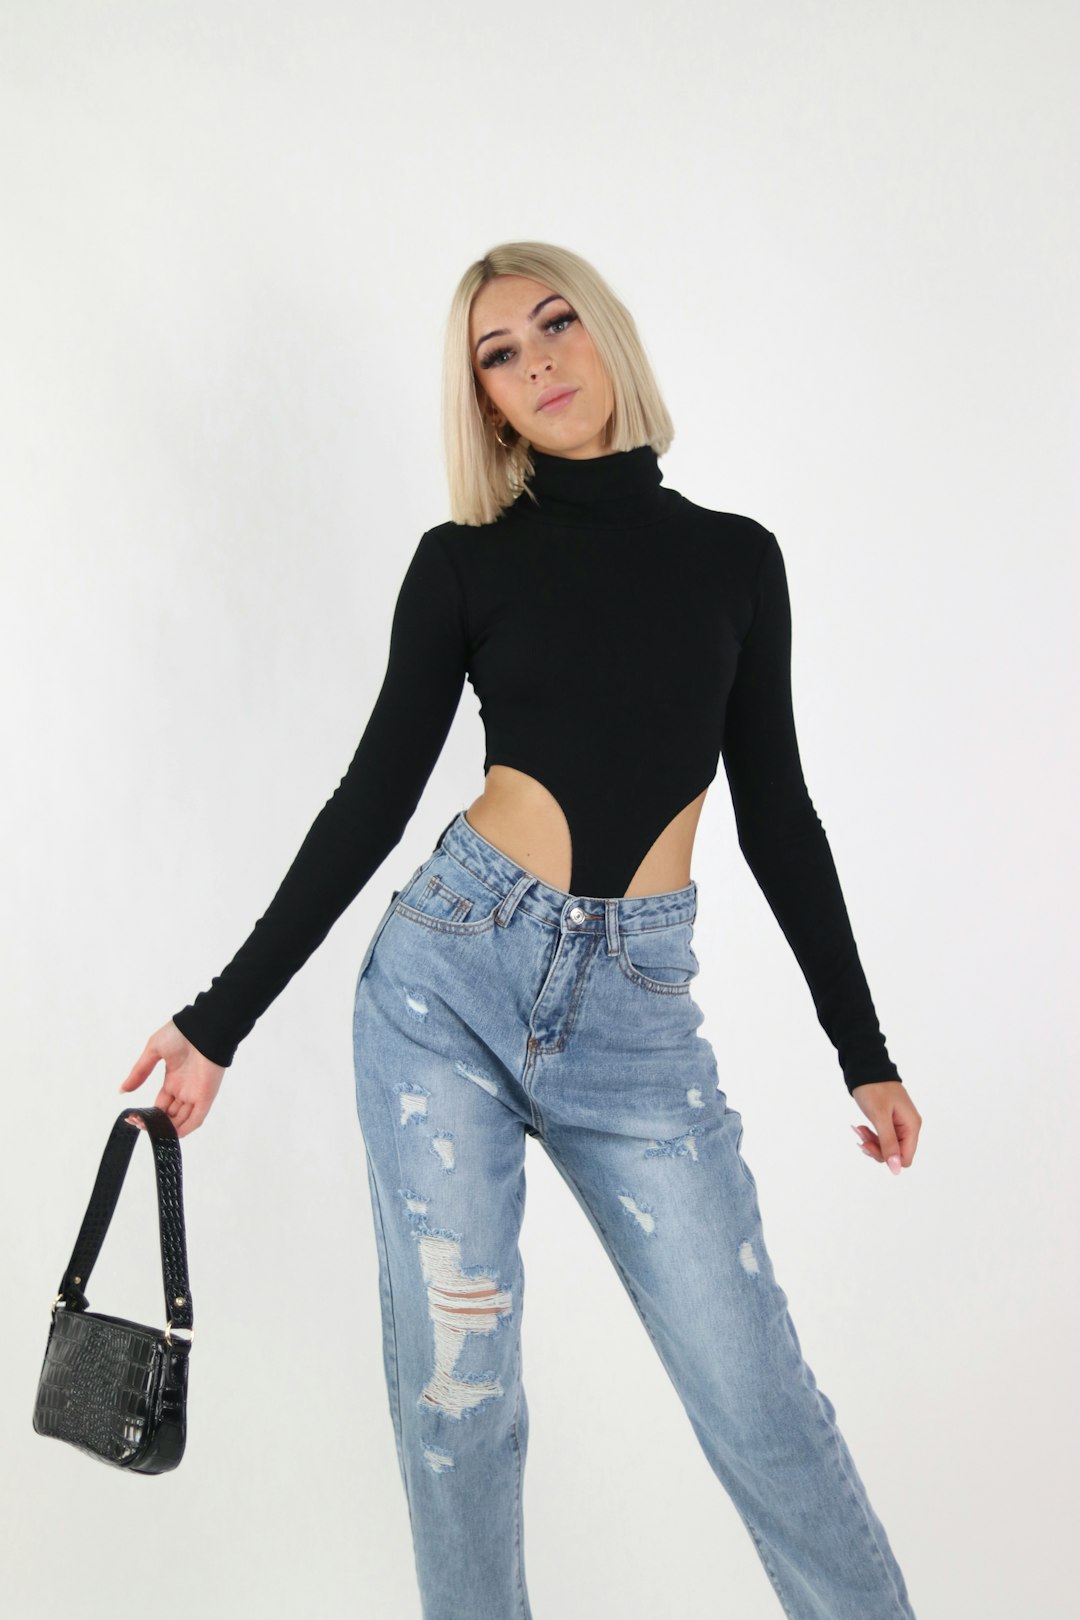 woman in black long sleeve shirt and blue denim jeans